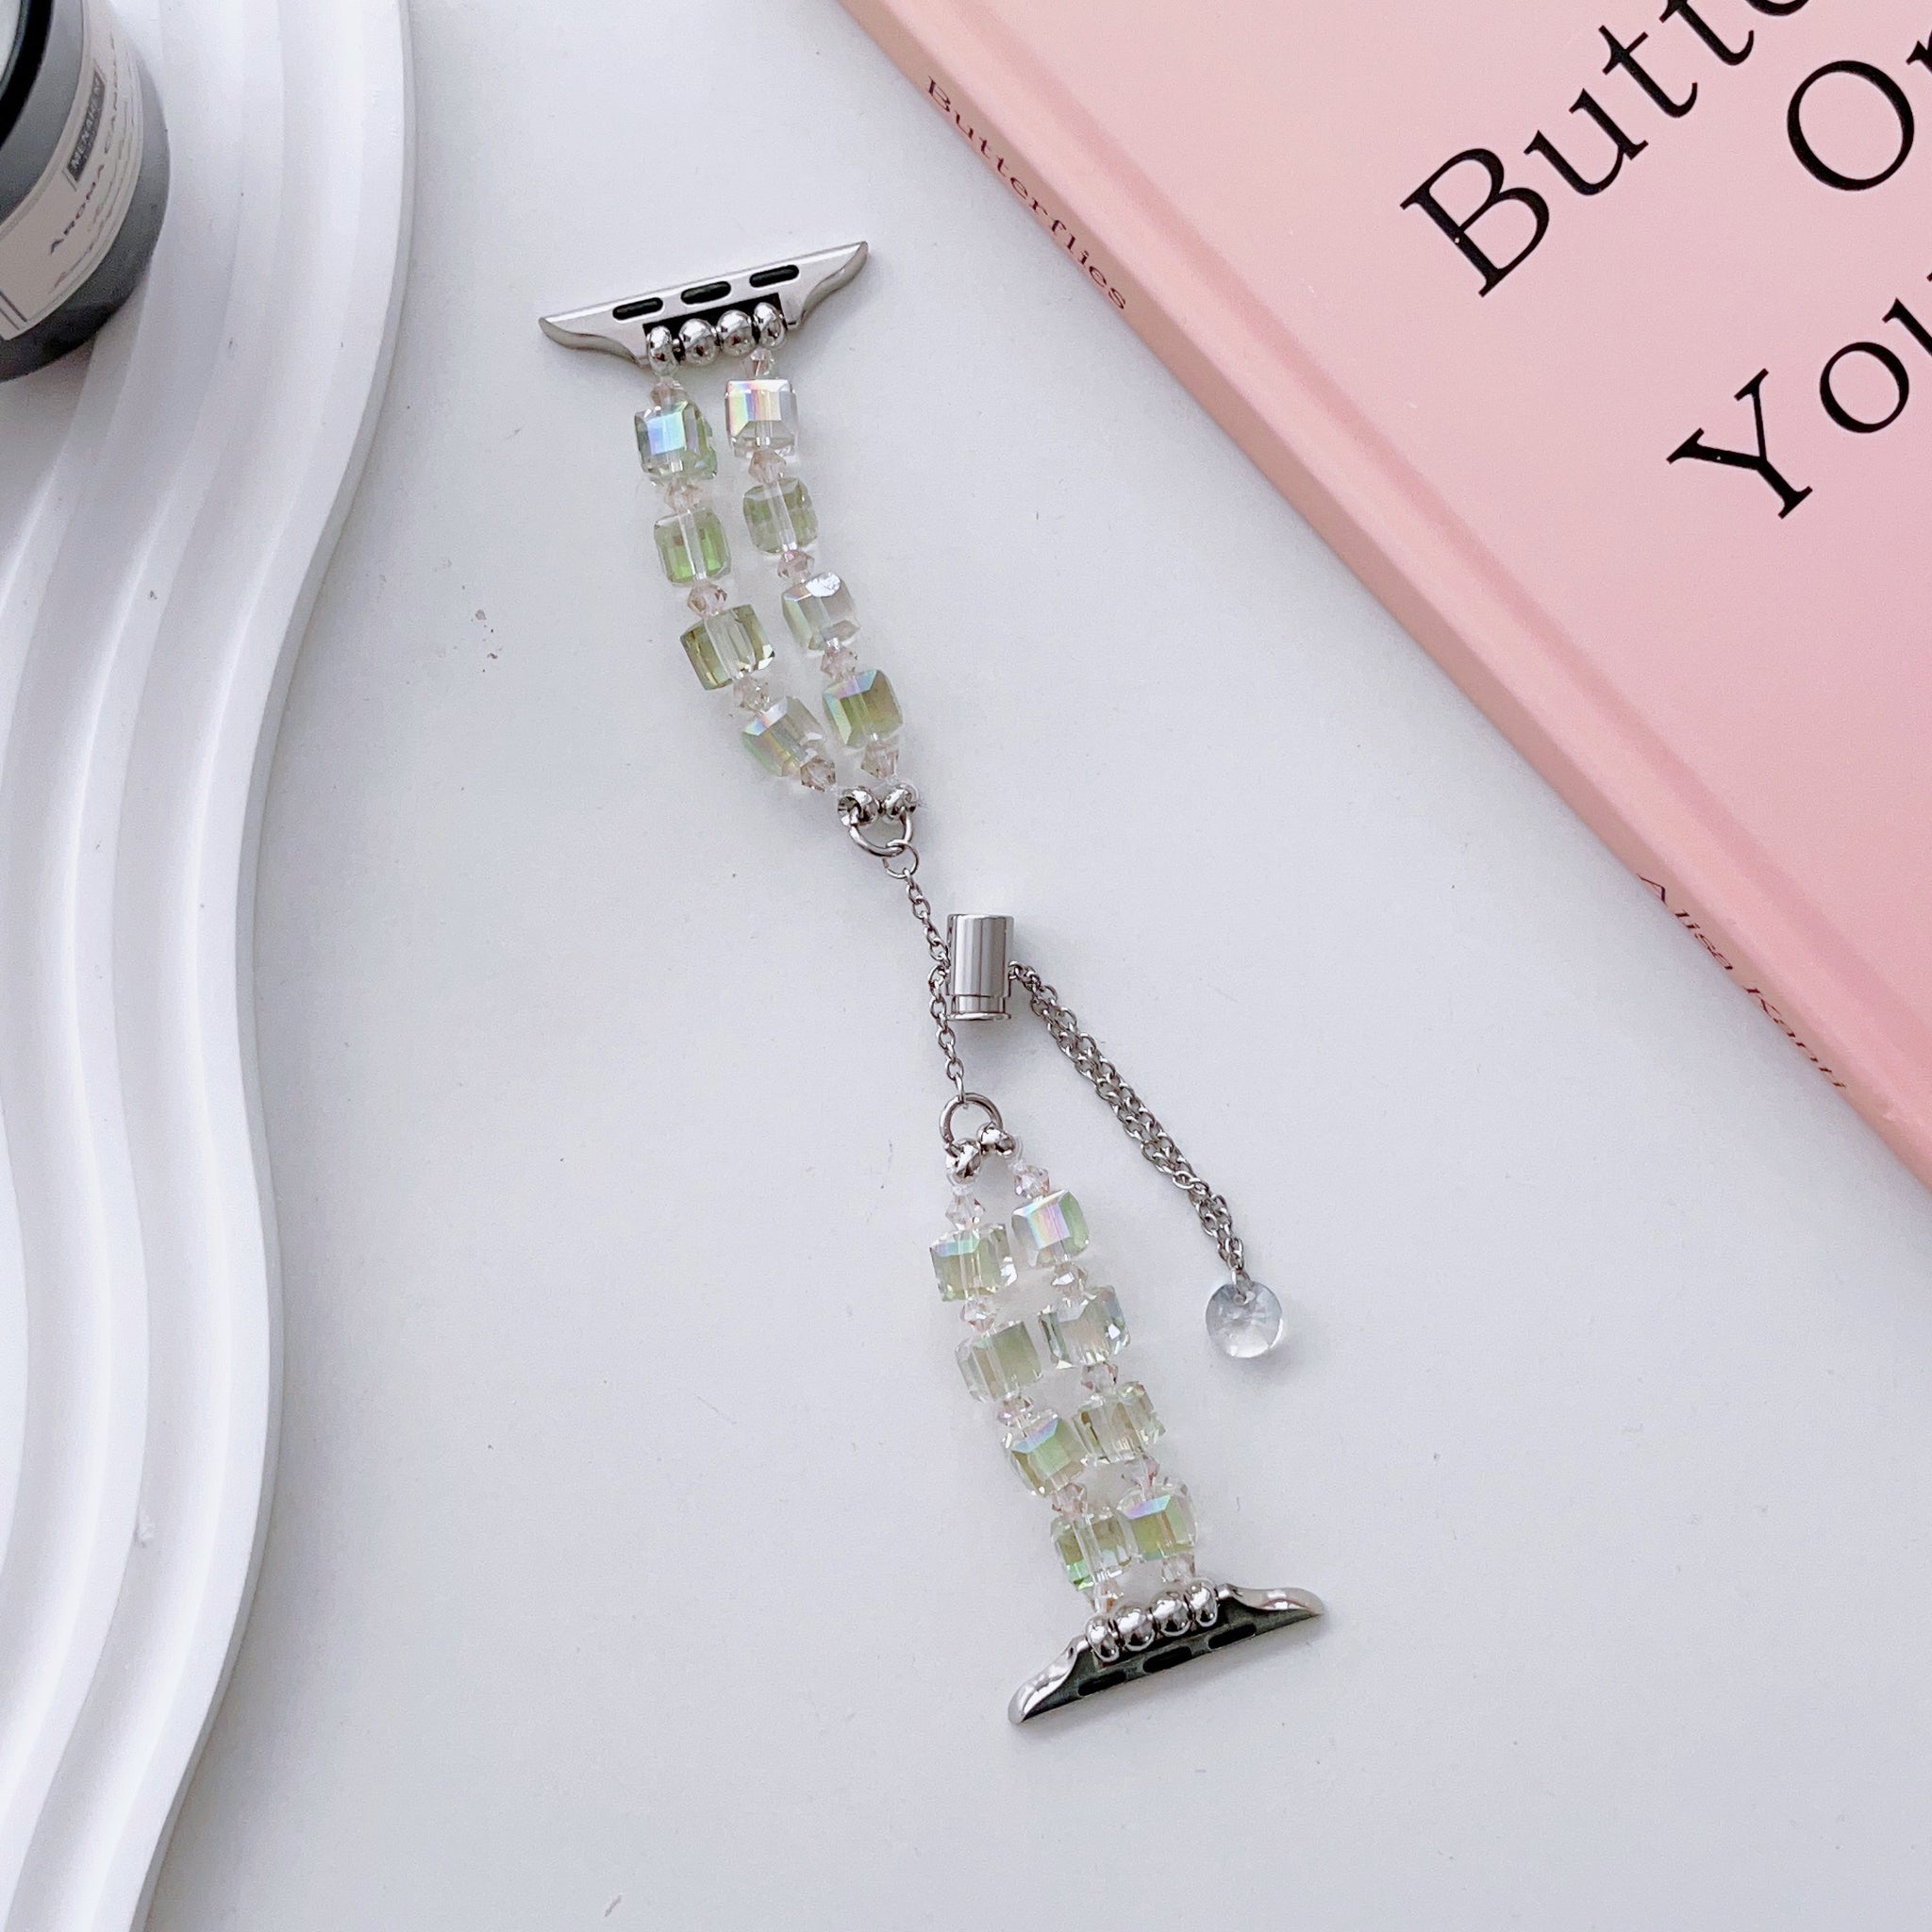 Crystal Cube Beads Charm Bracelet Apple Watch Bands for iWatch All Series